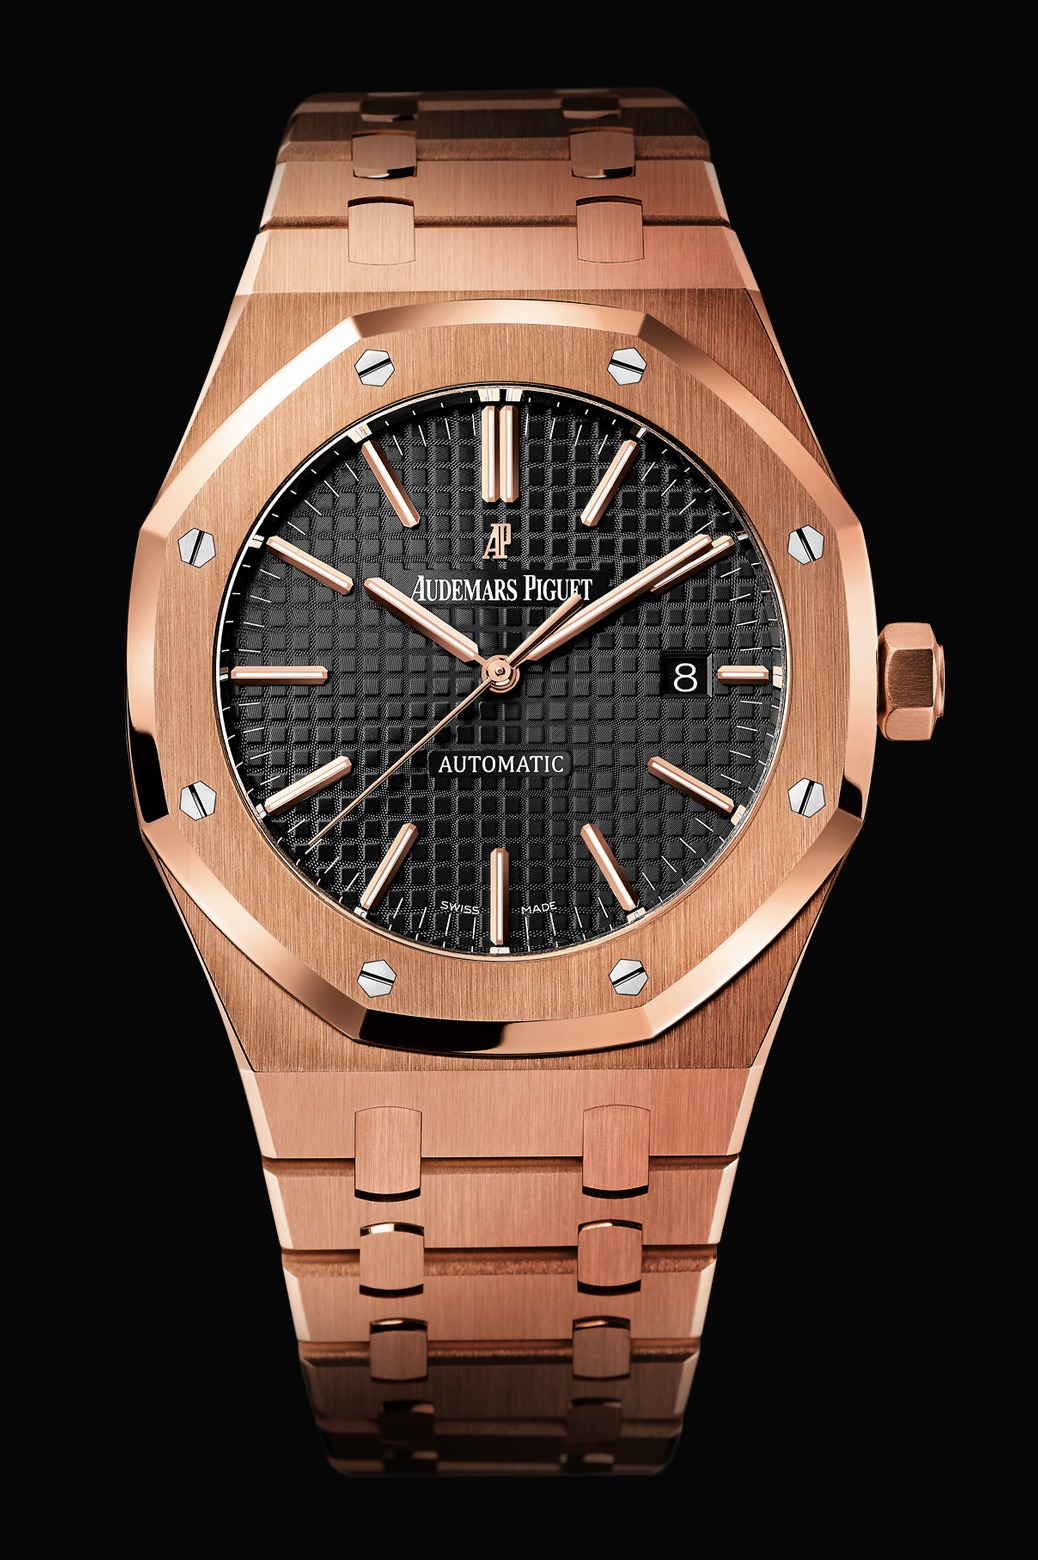 Audemars Piguet Royal Oak Automatic Pink Gold watch REF: 15400OR.OO.1220OR.01